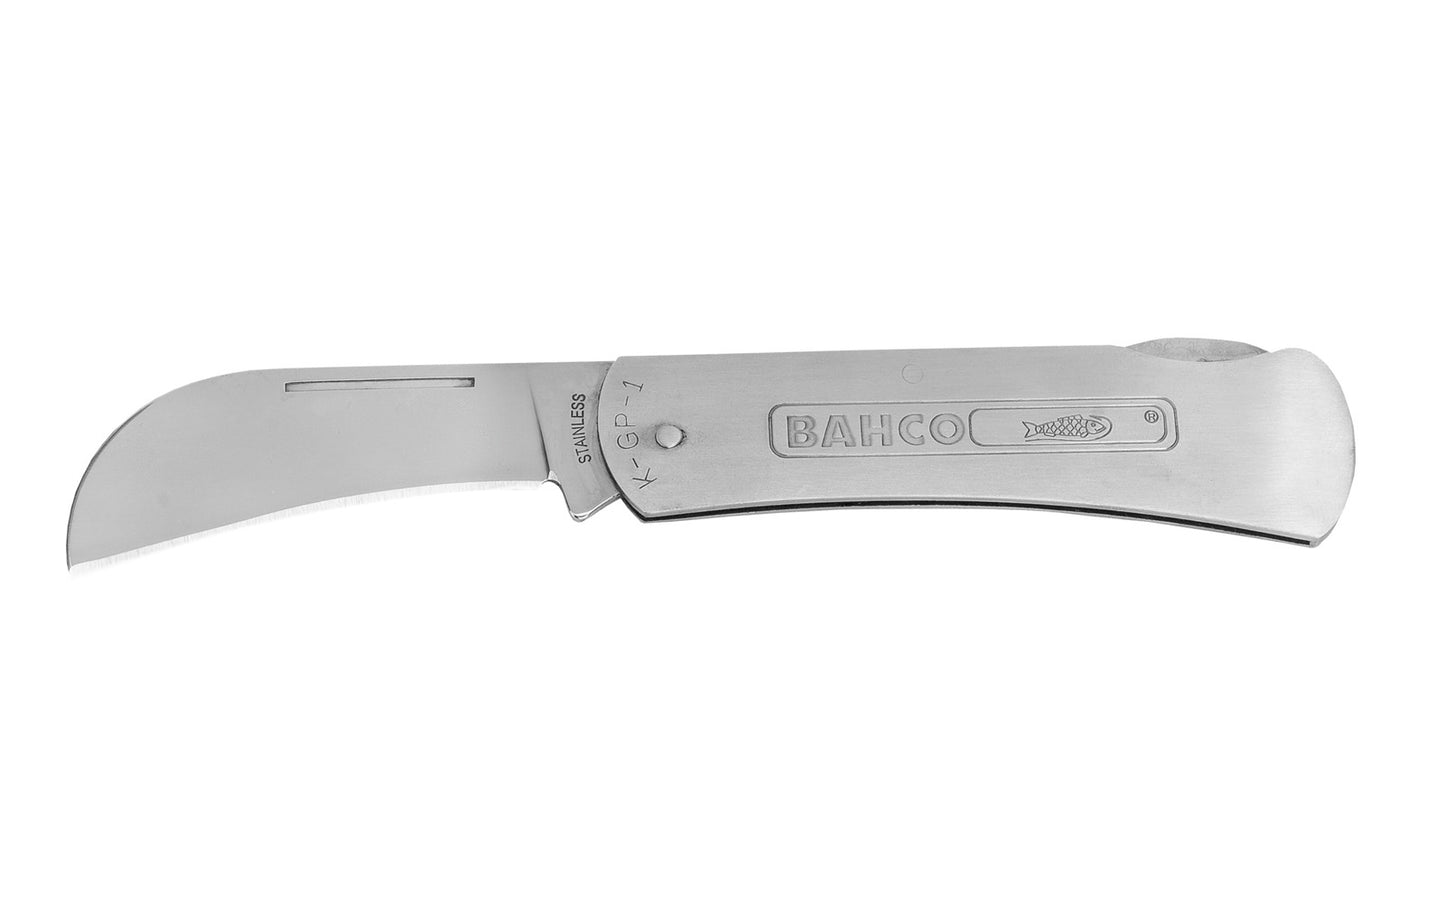  A quality Bahco Hook Shaped Foldable Stainless Pruning Knife for all gardening & pruning work such as flower cutting & cutting of twigs & young stems. Made of stainless steel. Foldable for safe transportation. Comfortable, very thin stainless steel handle. Thin design to fit into the pocket. Model K-GP-1. Made in UK.